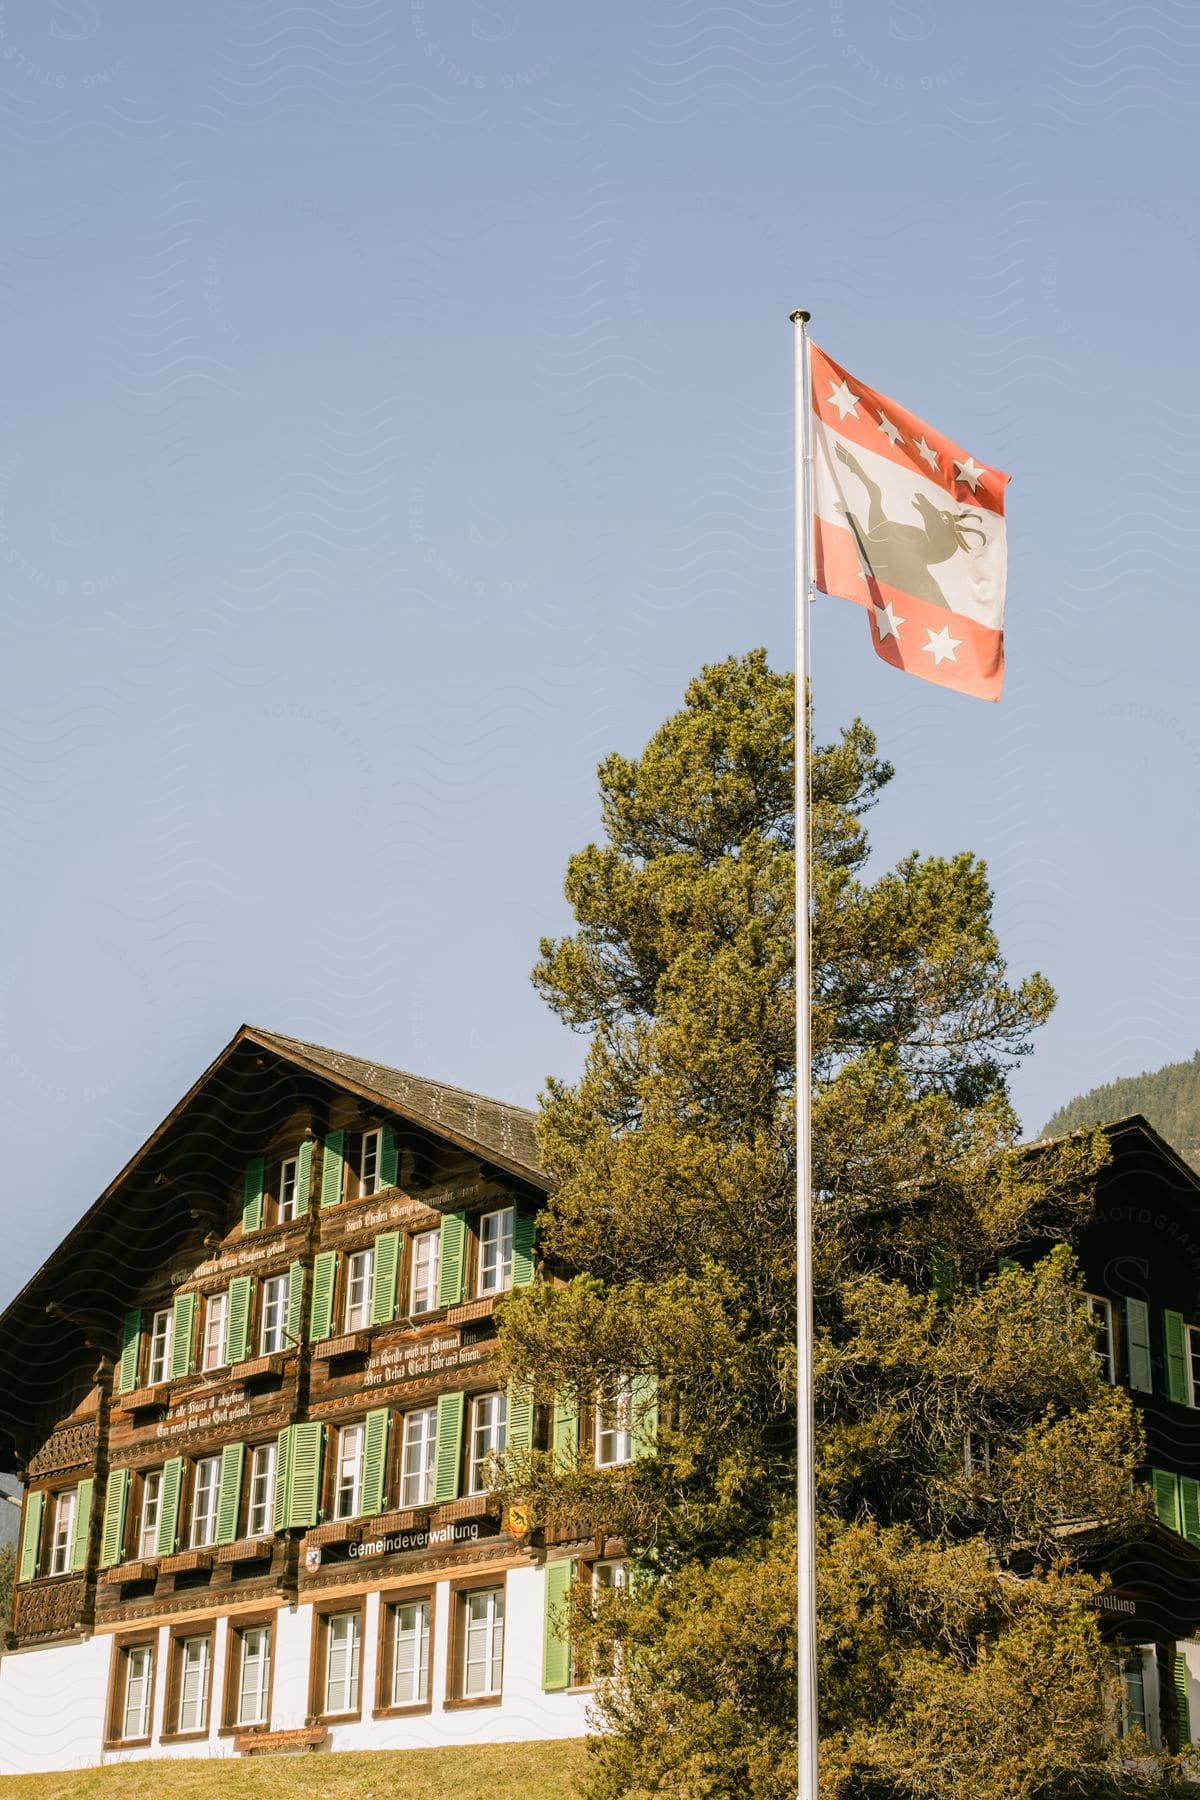 Exterior view of Hotel Chalet Swiss with a flag waving